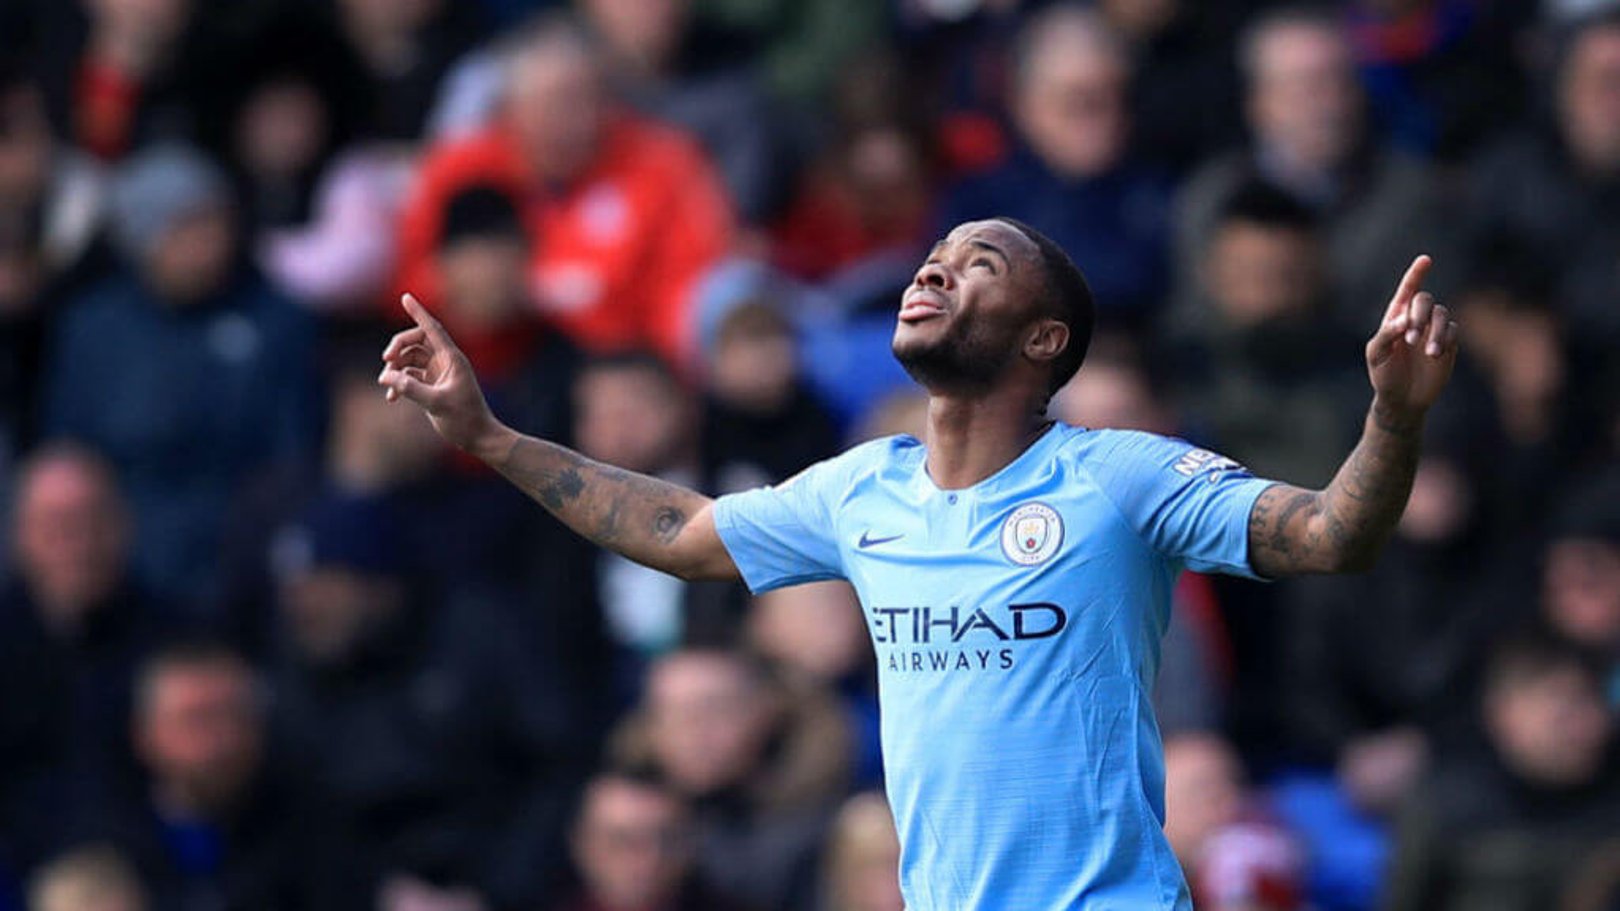 MORE JOY FOR THE BOY: It's a goal in each half for Raheem Sterling.